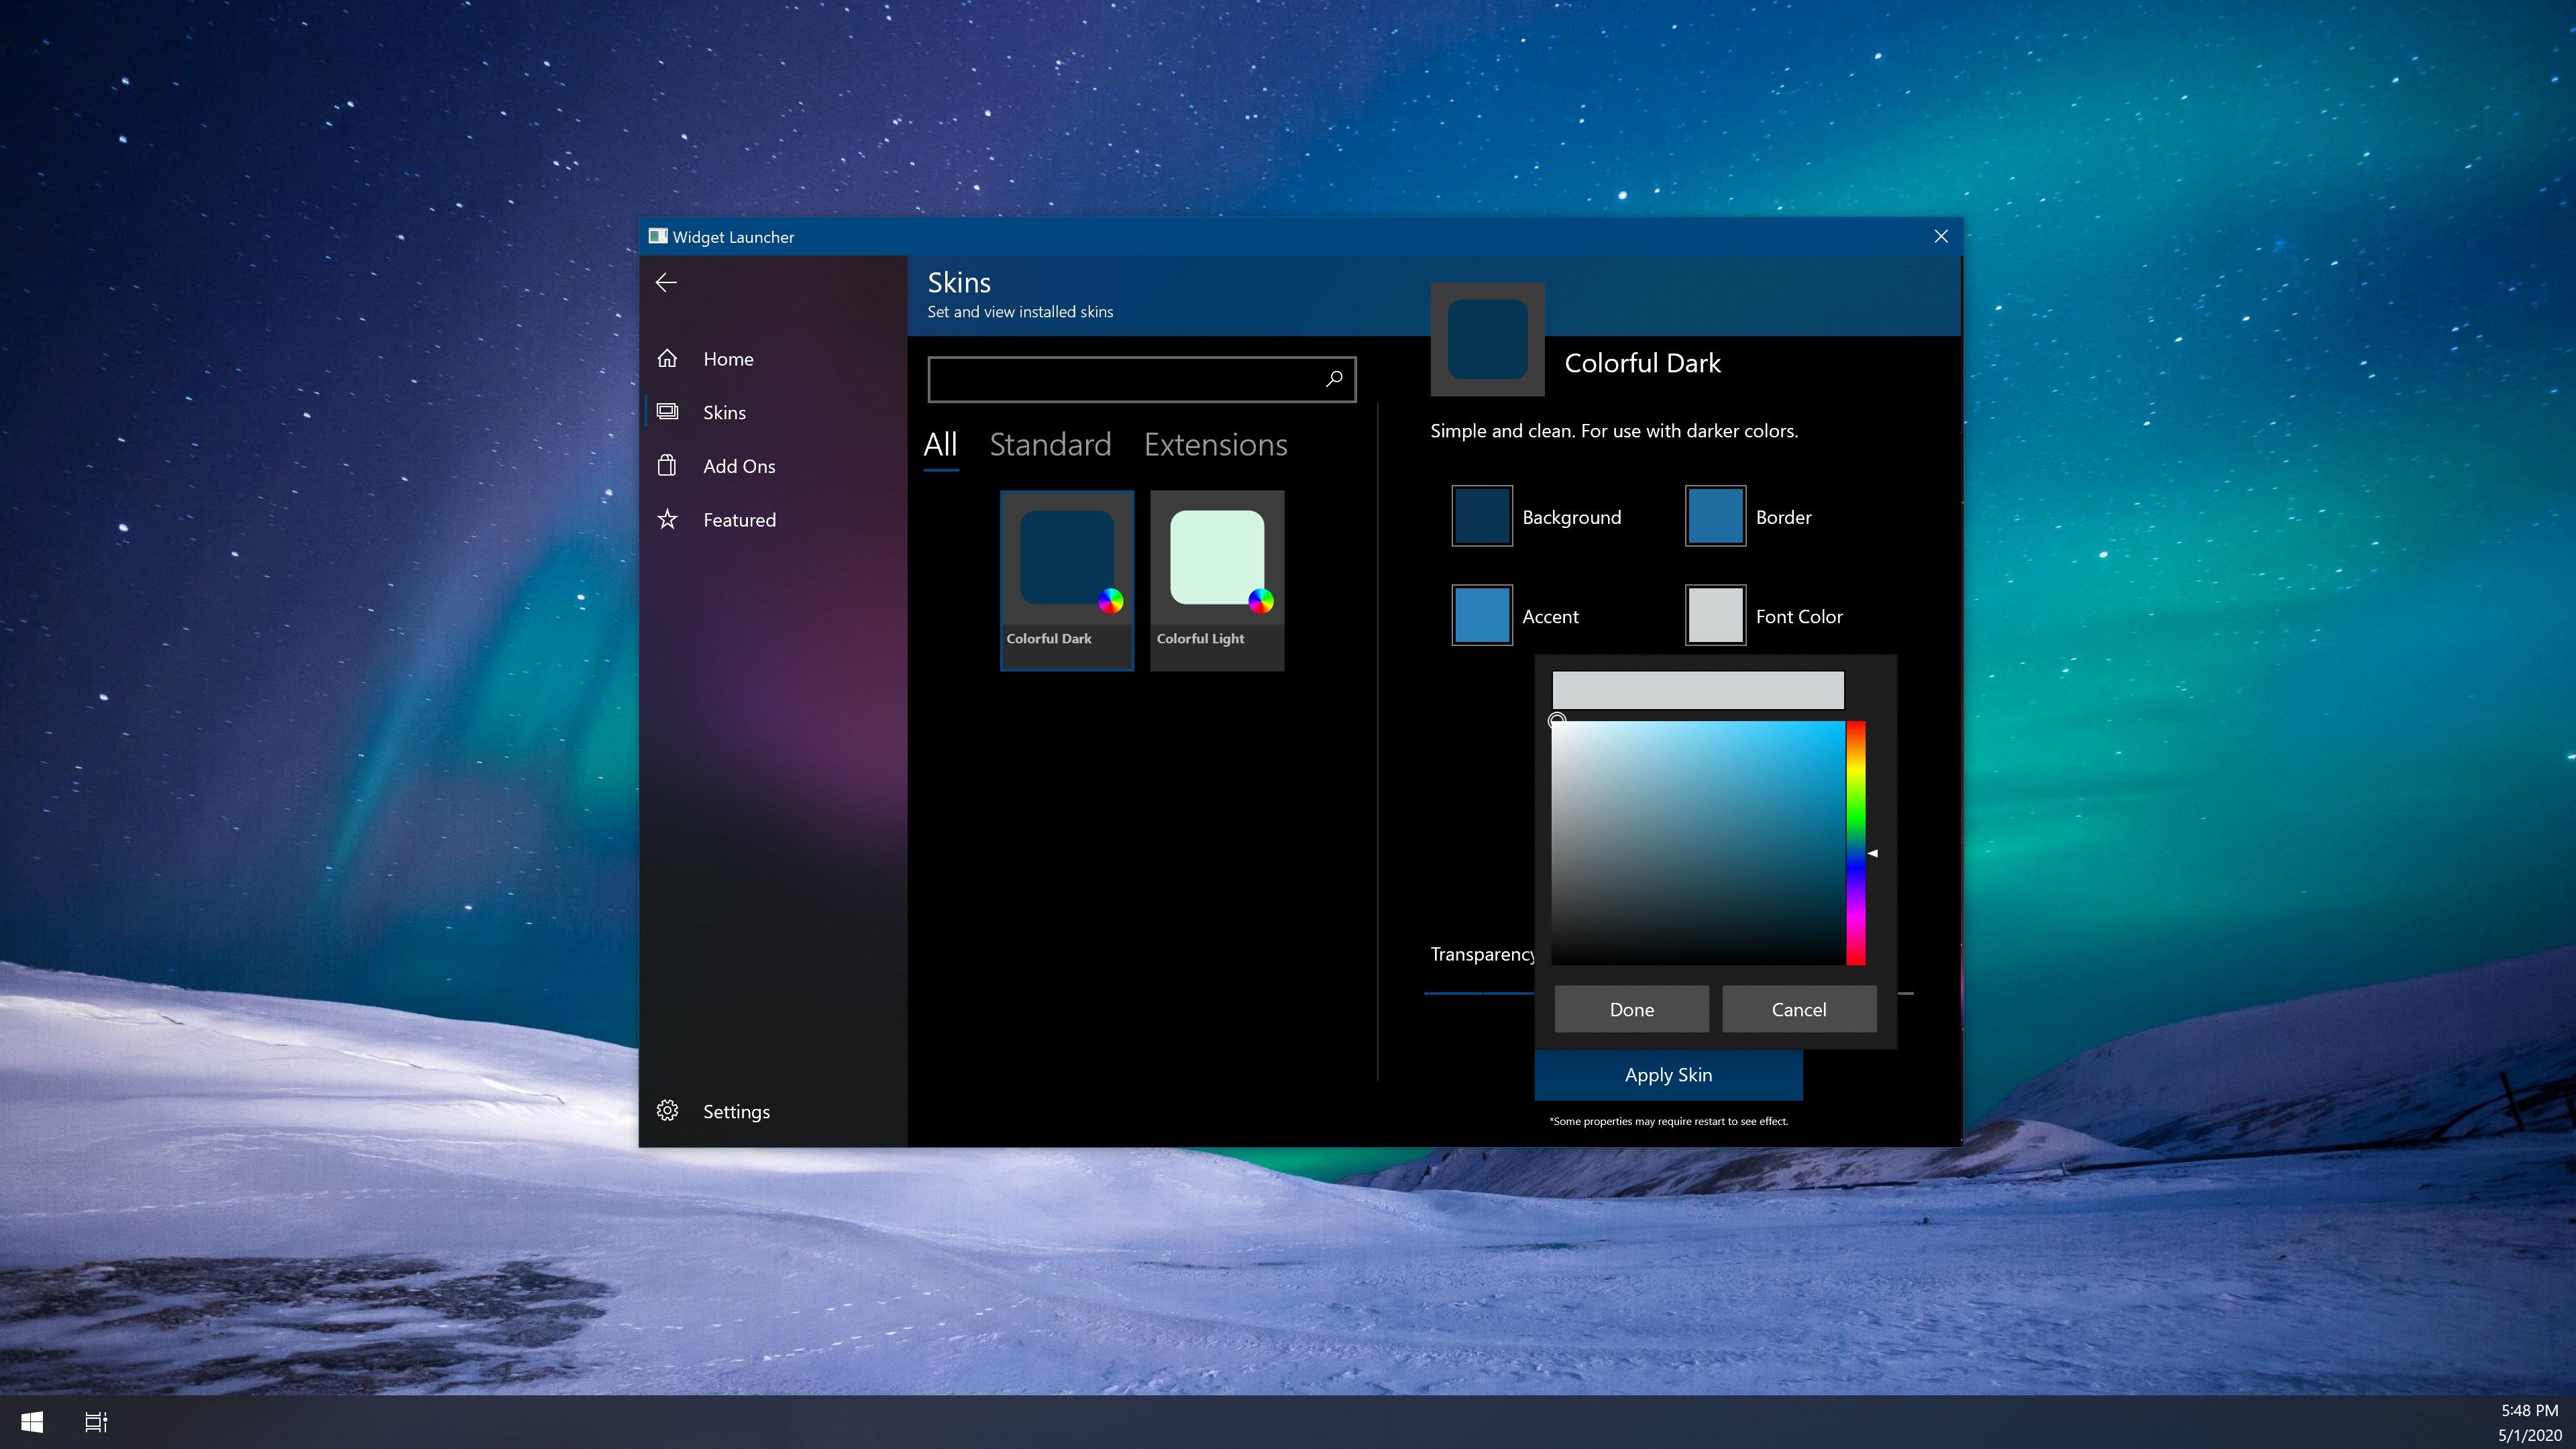 Use the launcher to customize the skin and color of your widgets